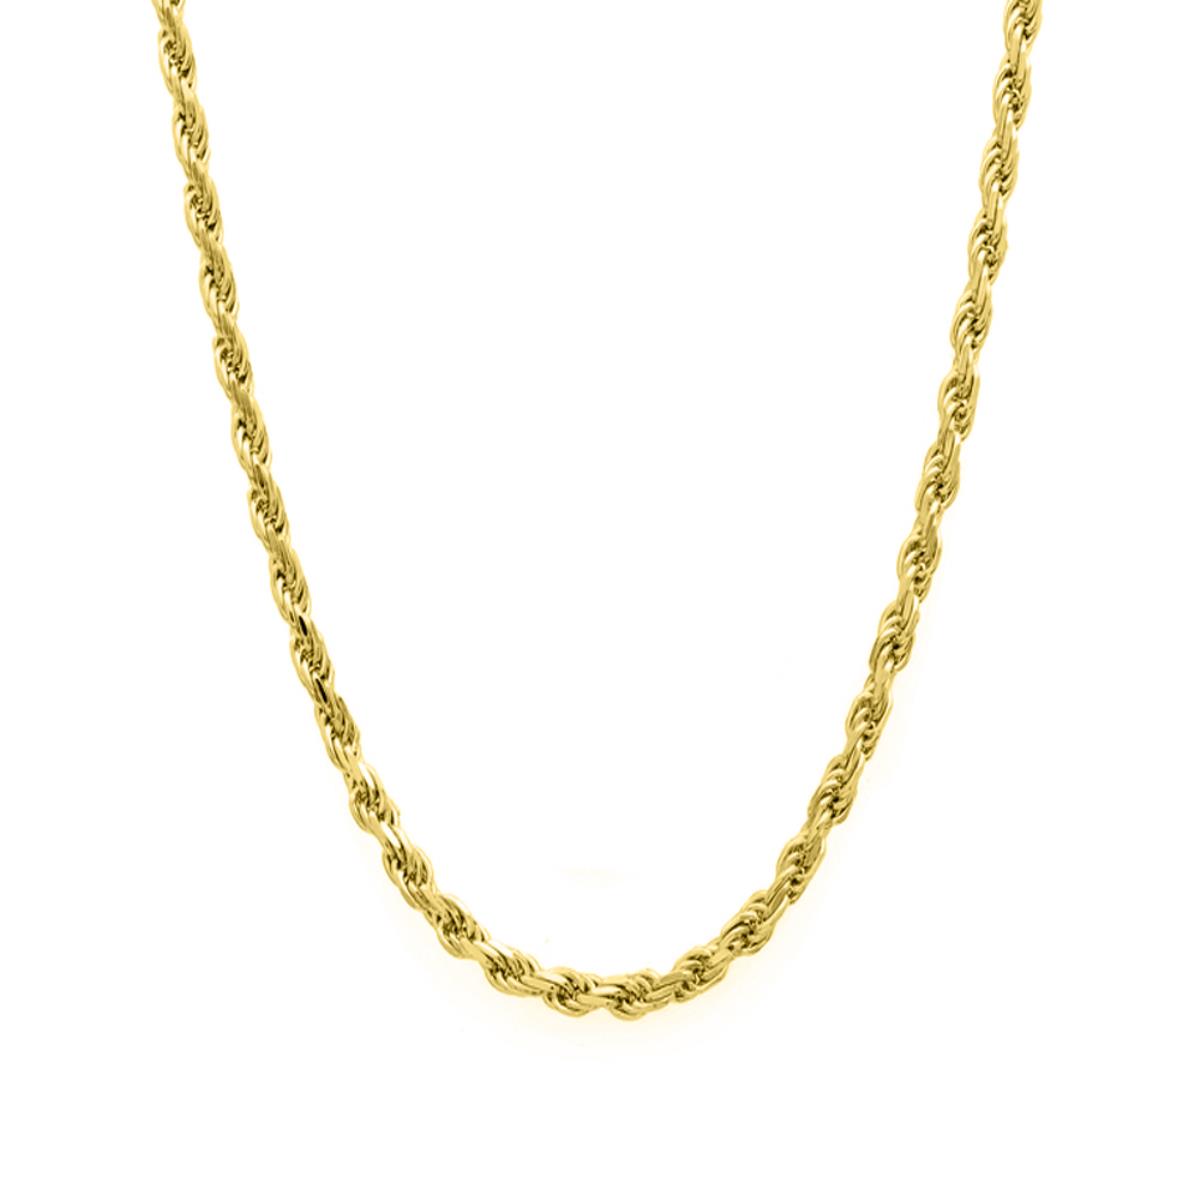 10k Yellow Gold Solid DC Rope 016 22" Chain